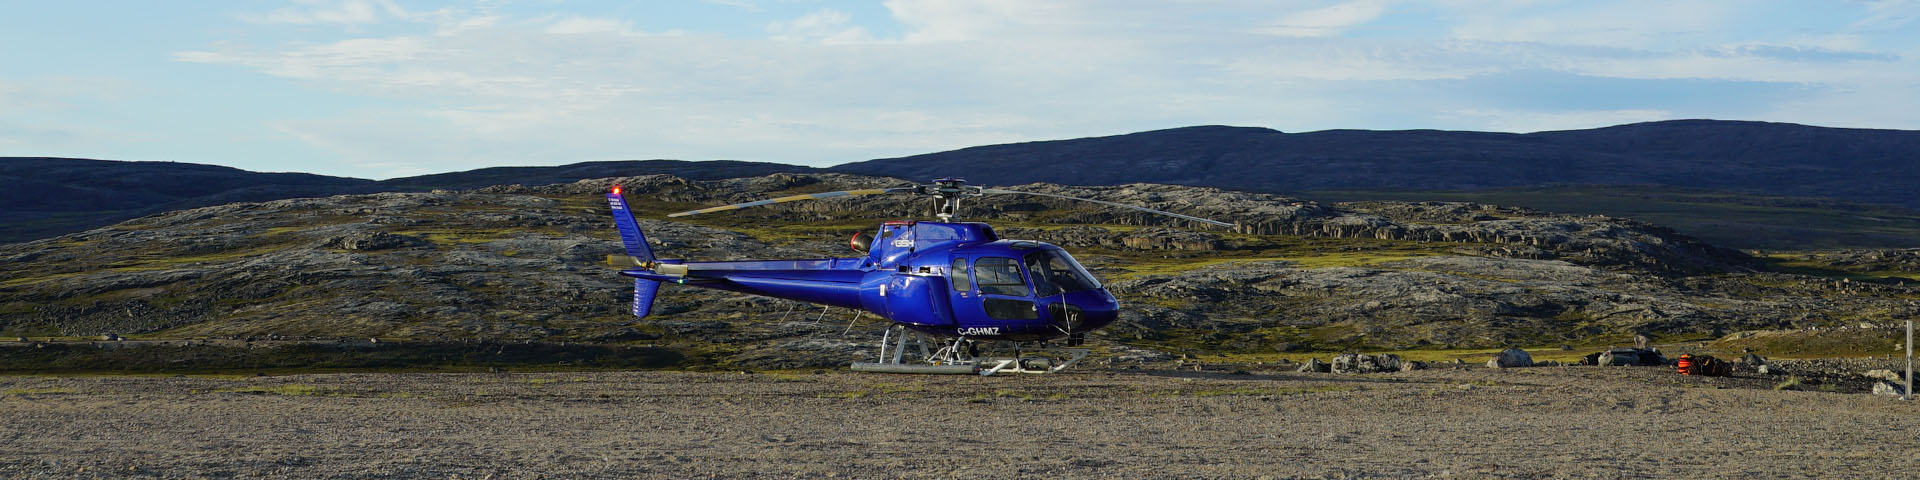 A blue helicopter on a dirt runway surrounded by tundra scenery. 